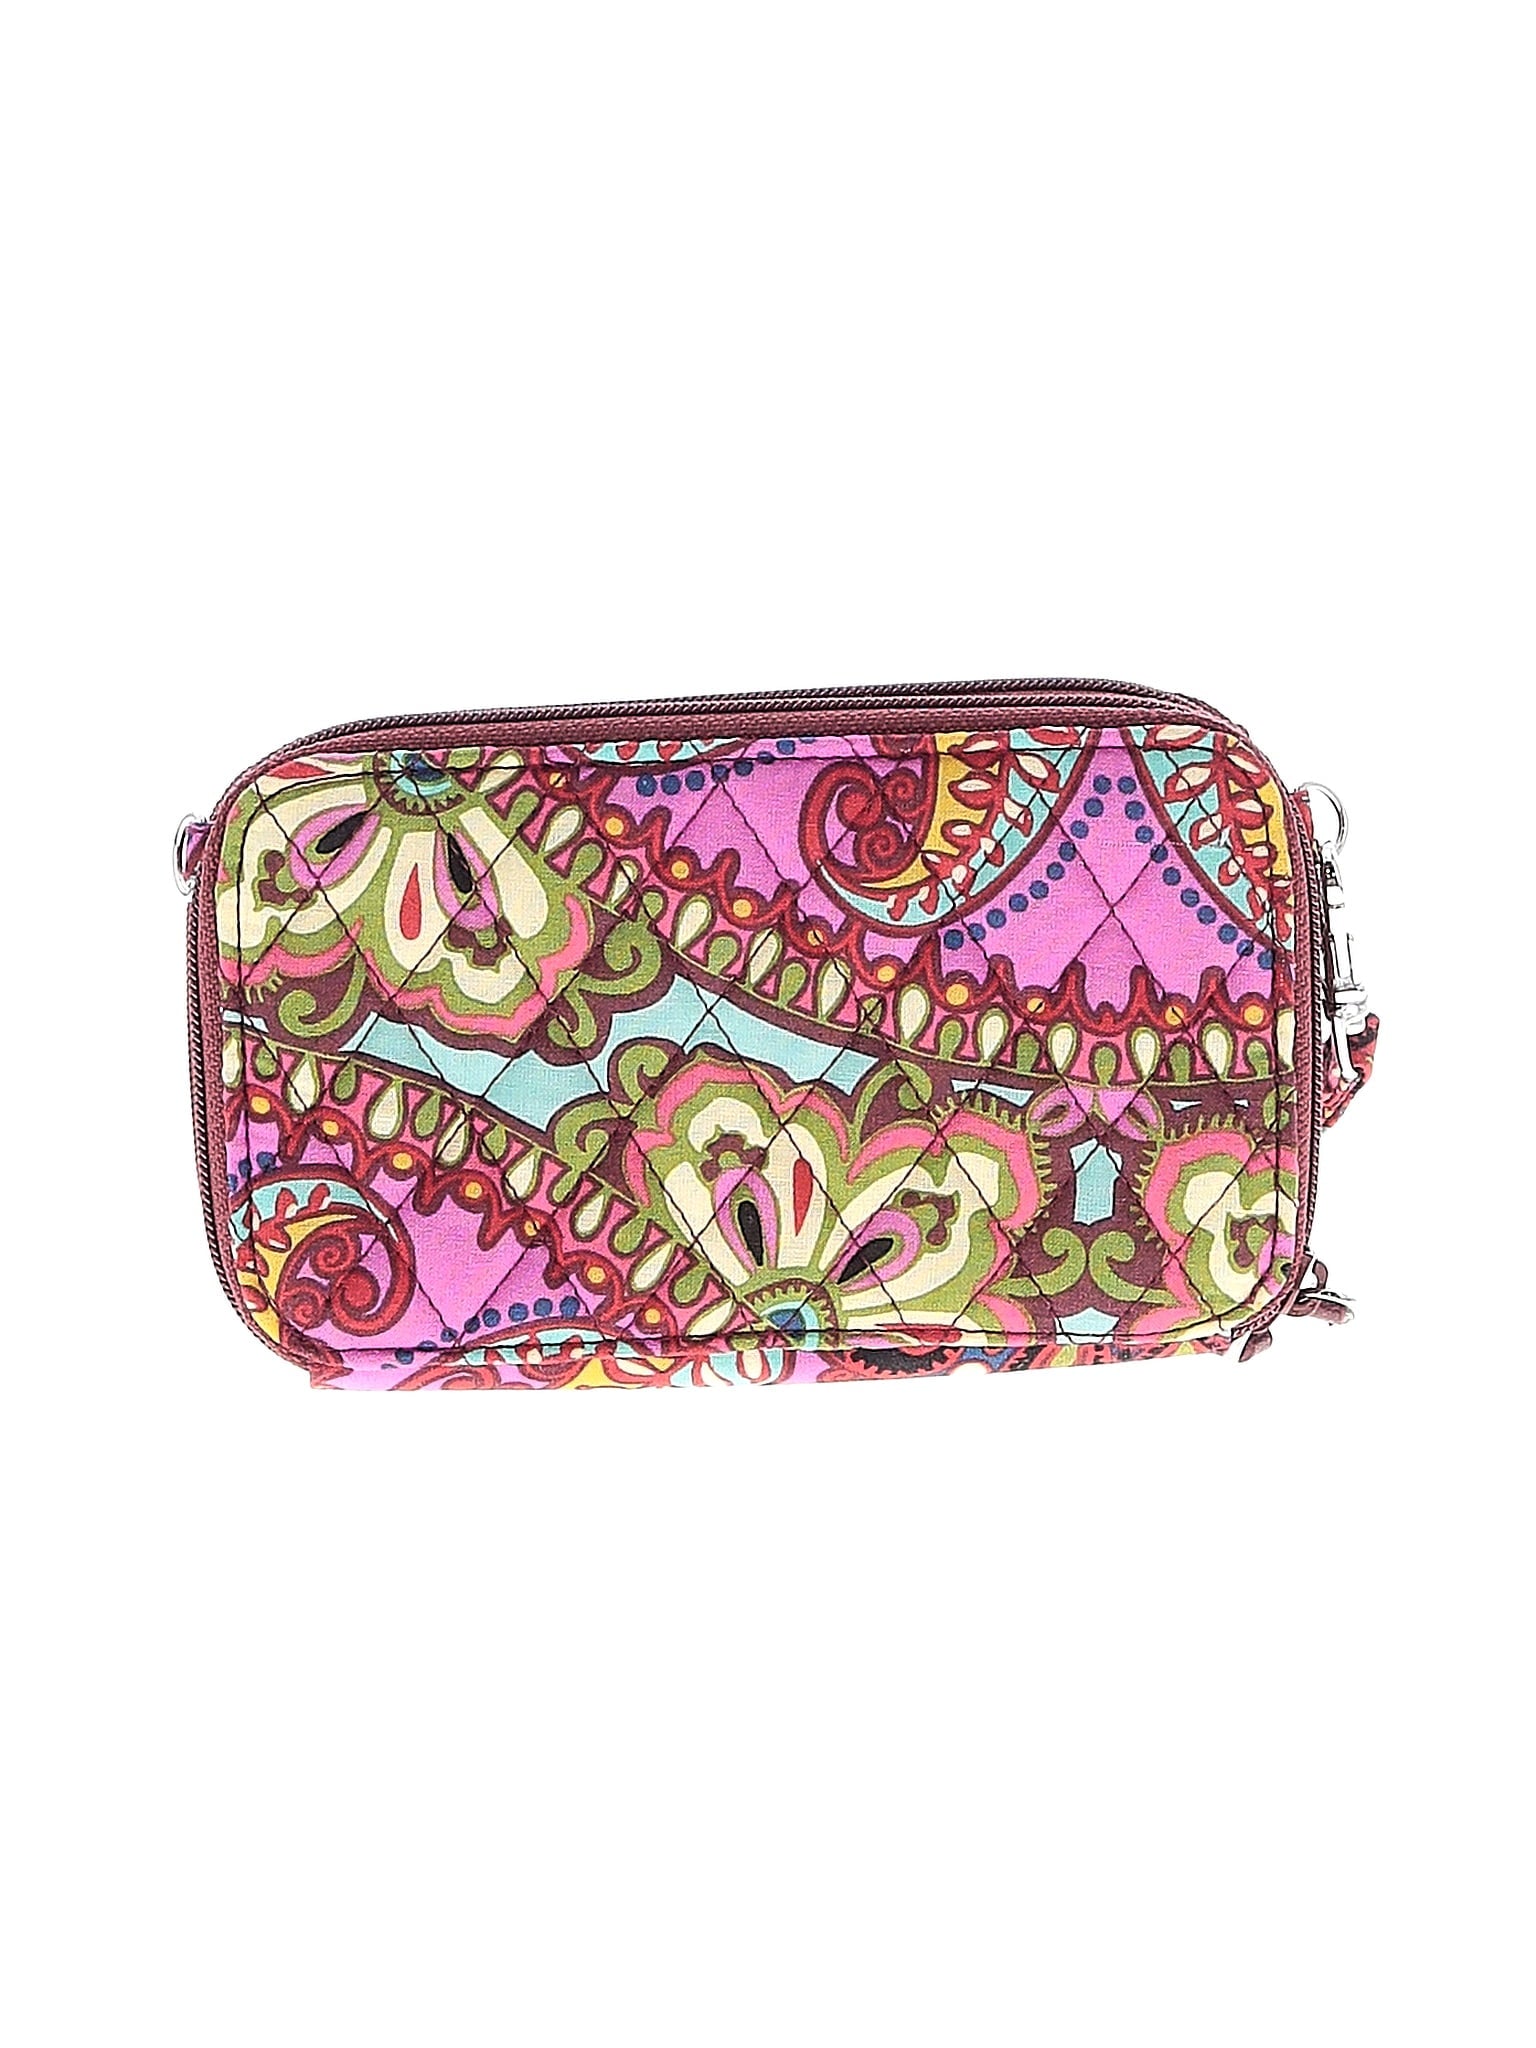 Resort Medallion All in One Crossbody for iPhone 6 size - One Size